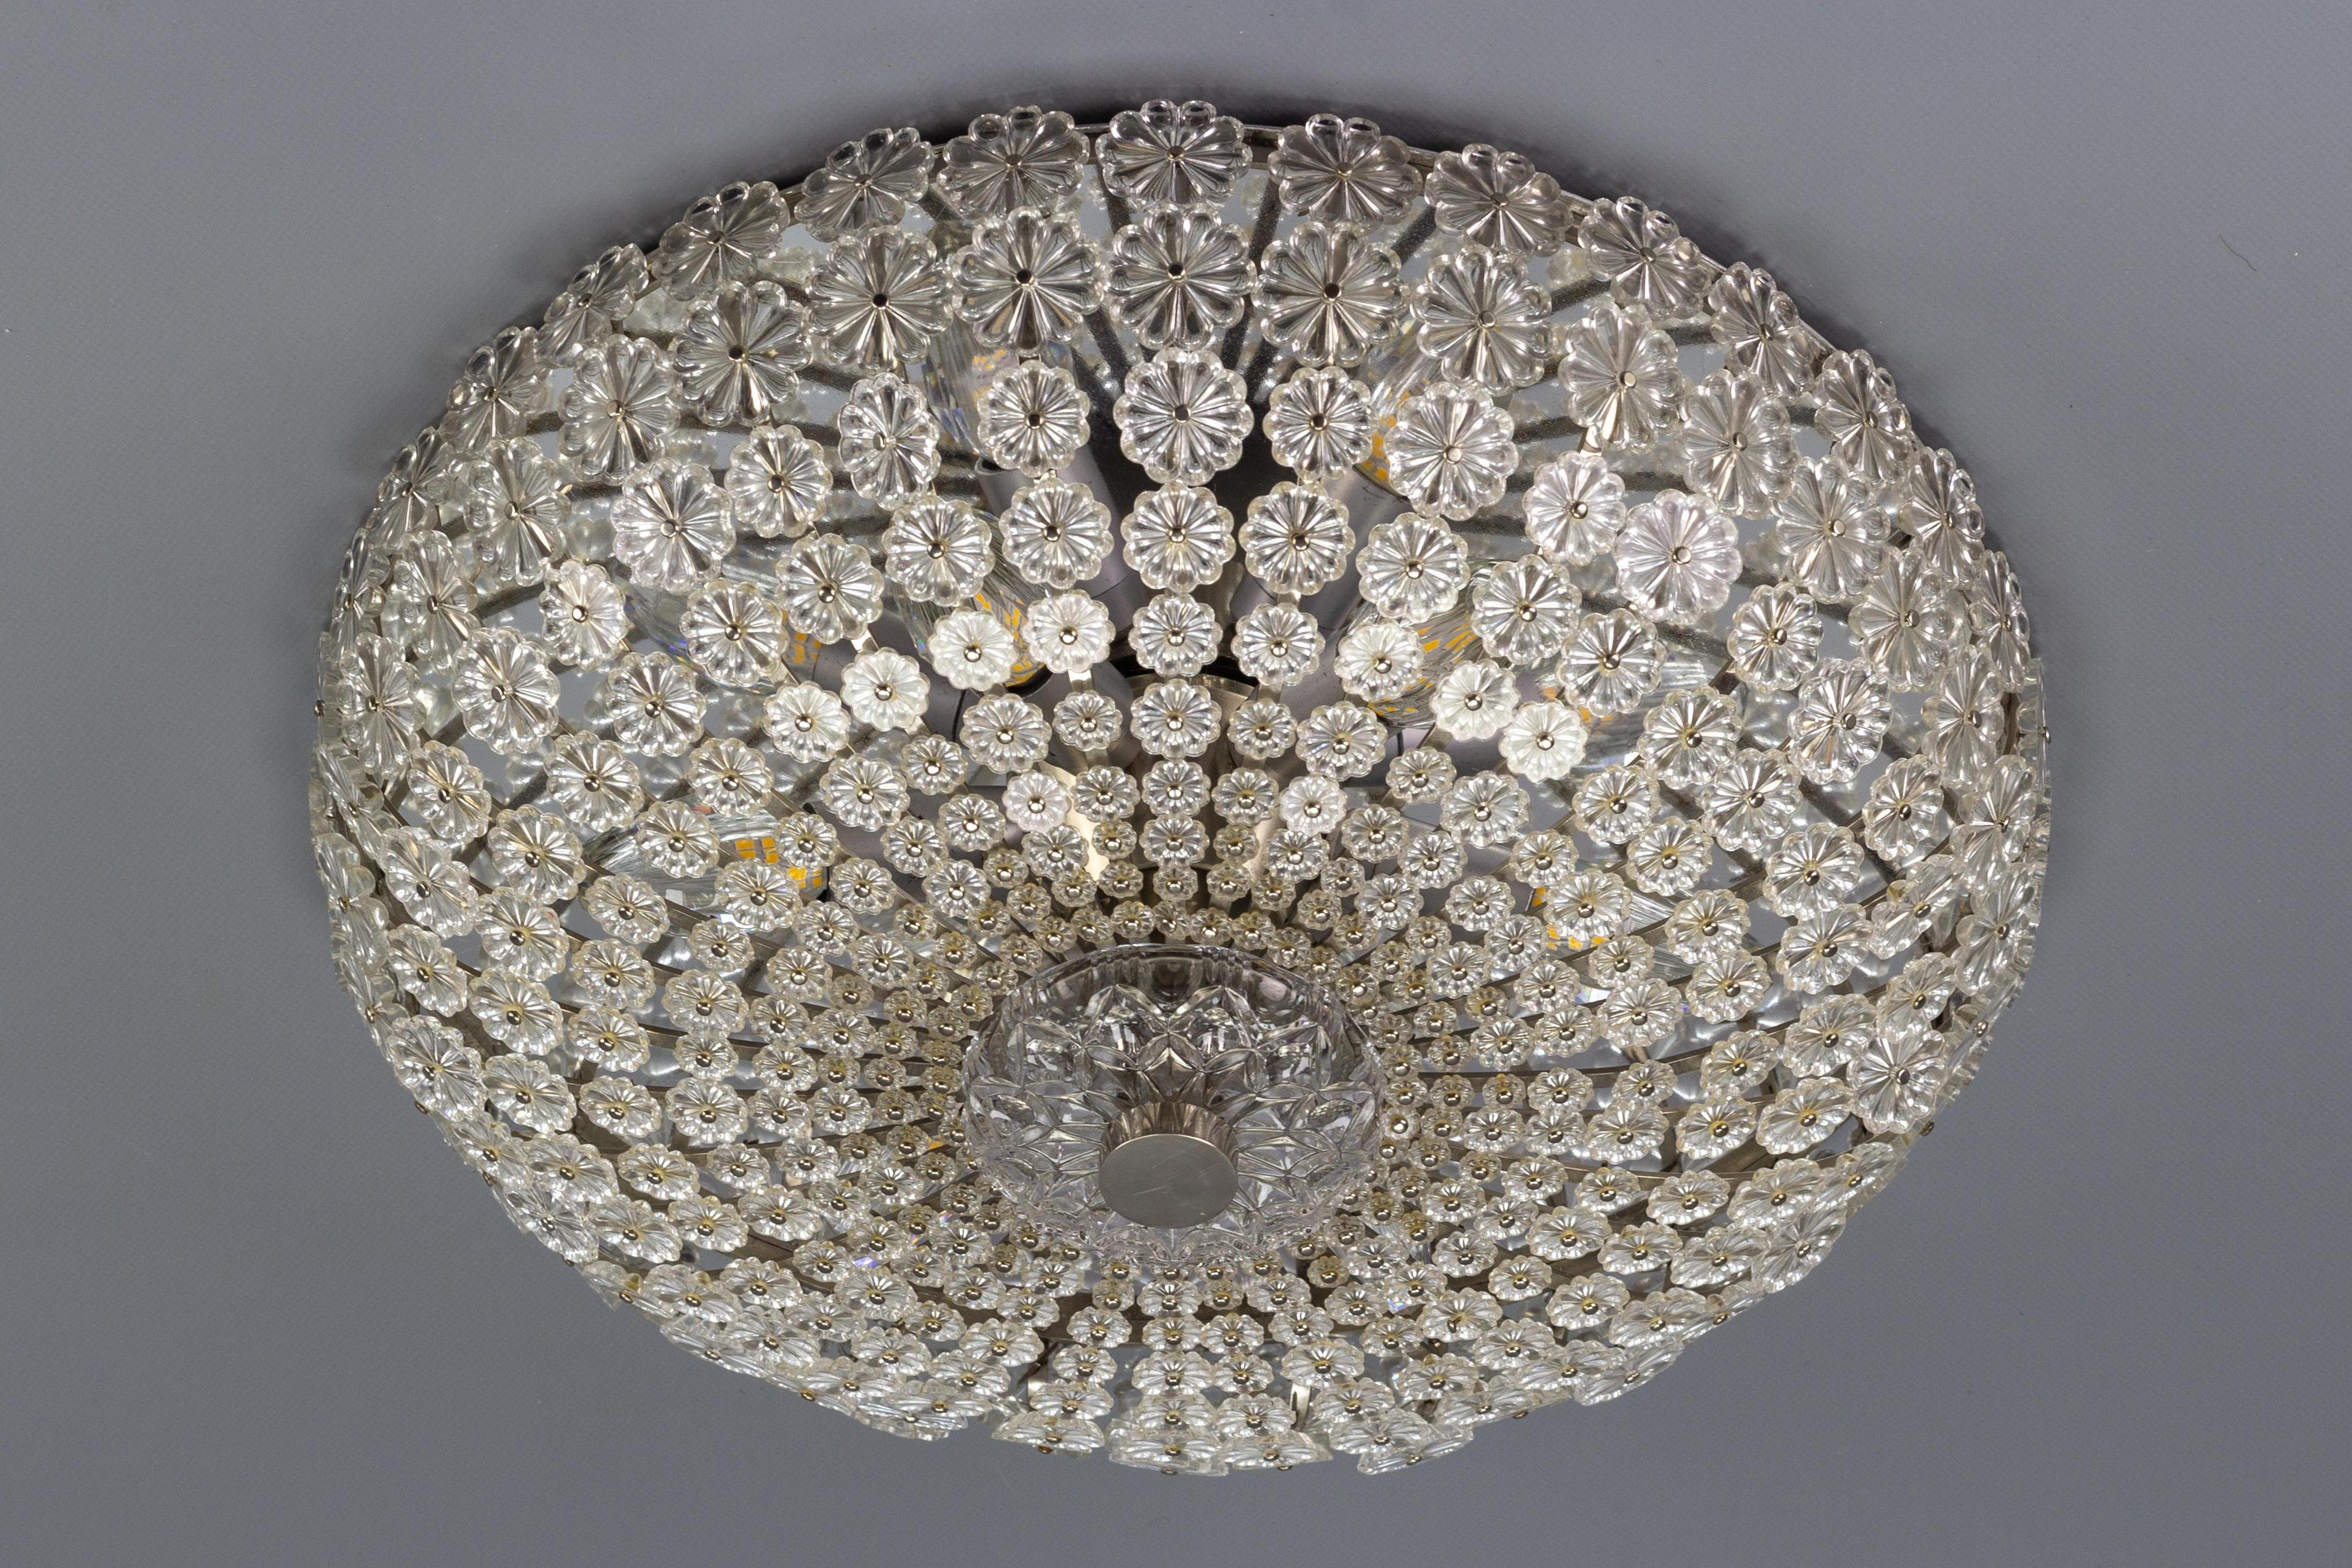 This impressive Space Age or Stejnar period flush mount by H. Richter features a chrome sheet and frame, covered in glass flowers richly decorated from smaller to slightly larger. The beautiful ceiling light fixture is centered with glass and chrome